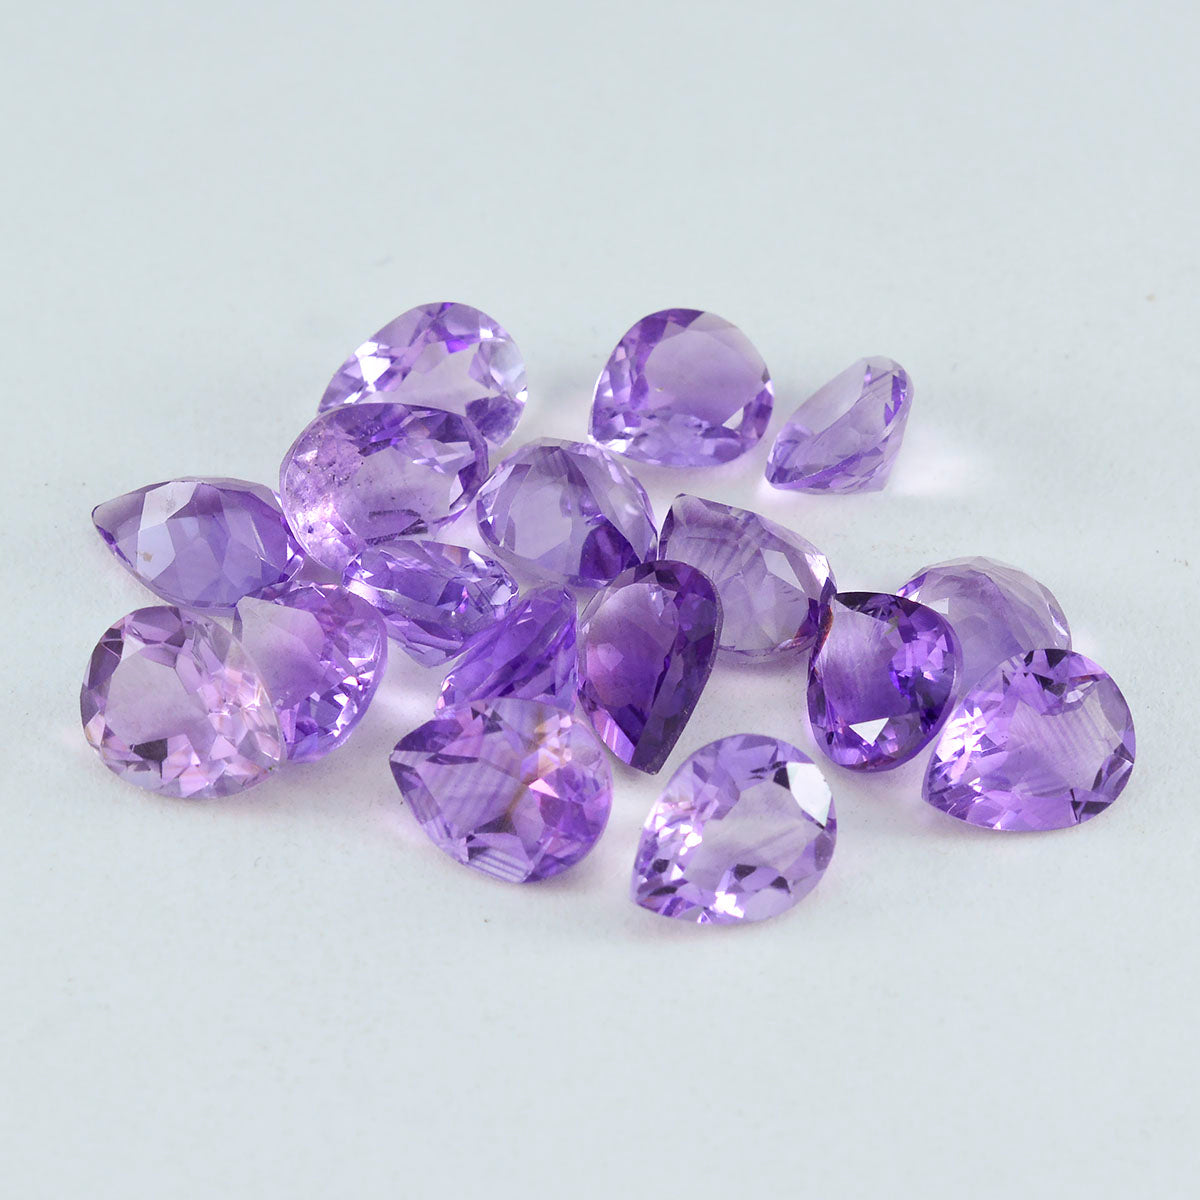 Riyogems 1PC Real Purple Amethyst Faceted 5x7 mm Pear Shape excellent Quality Stone